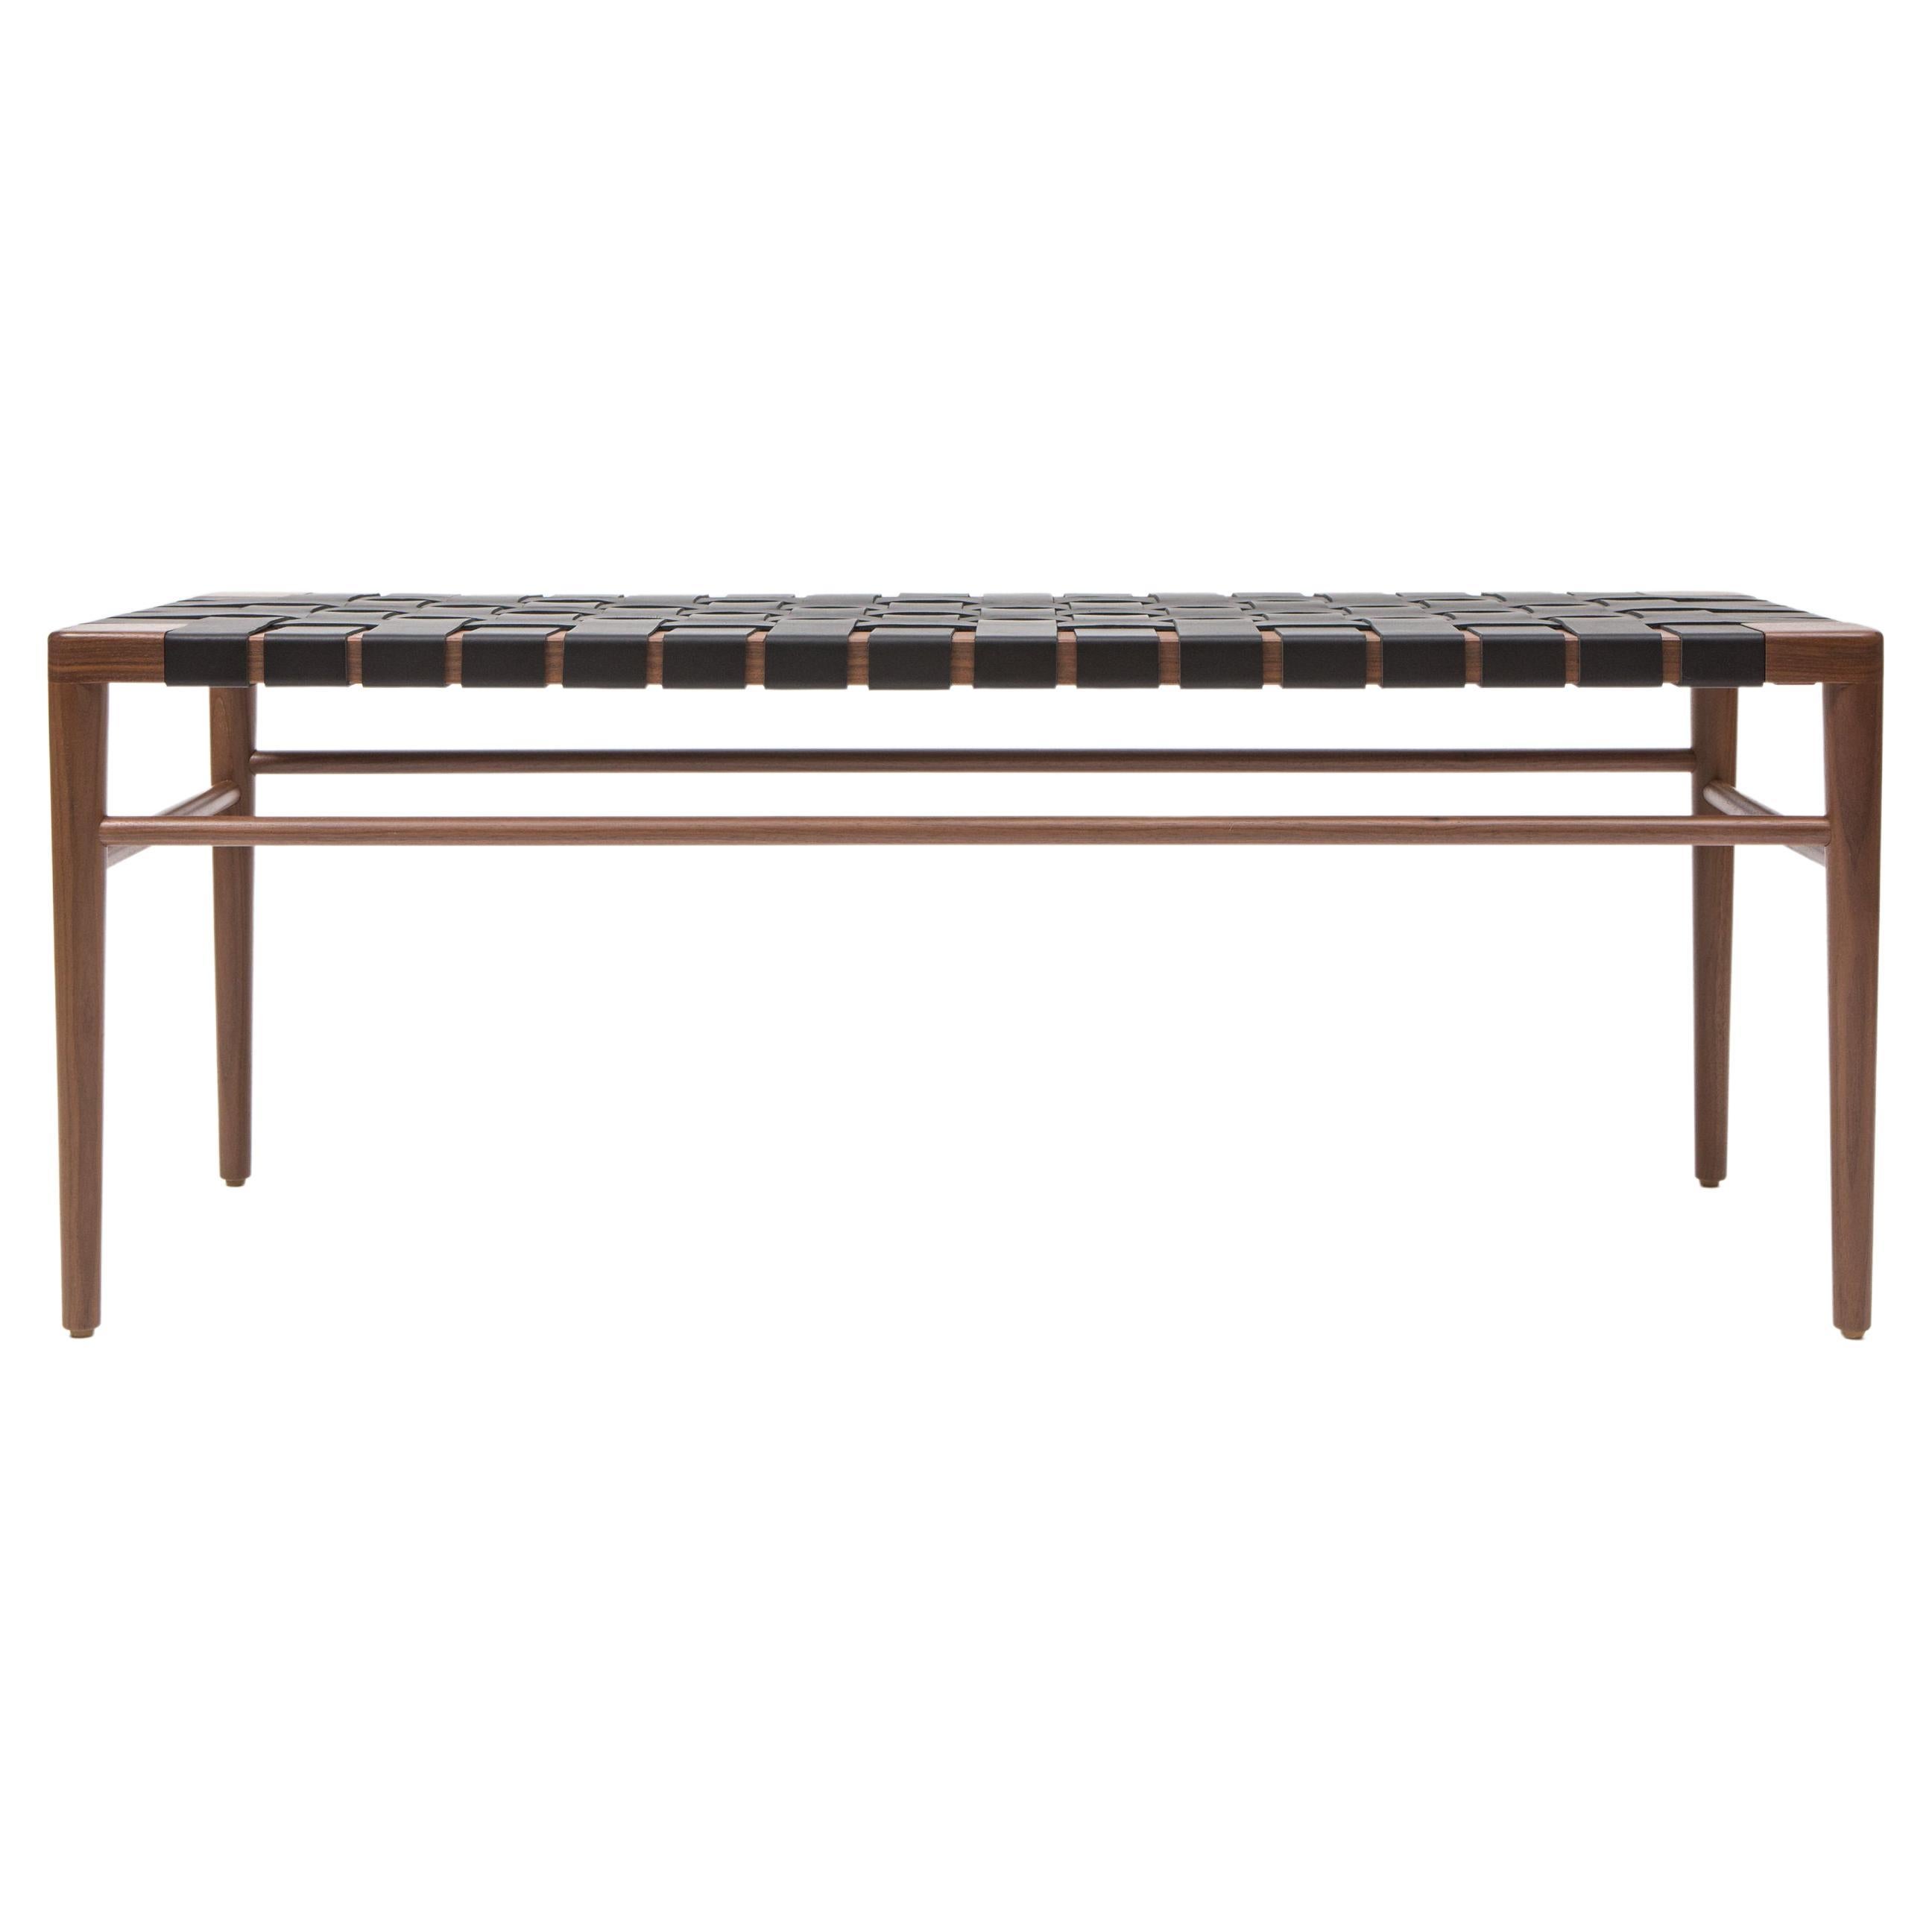 60" Woven Leather Bench in Walnut and Black Leather by Mel Smilow For Sale